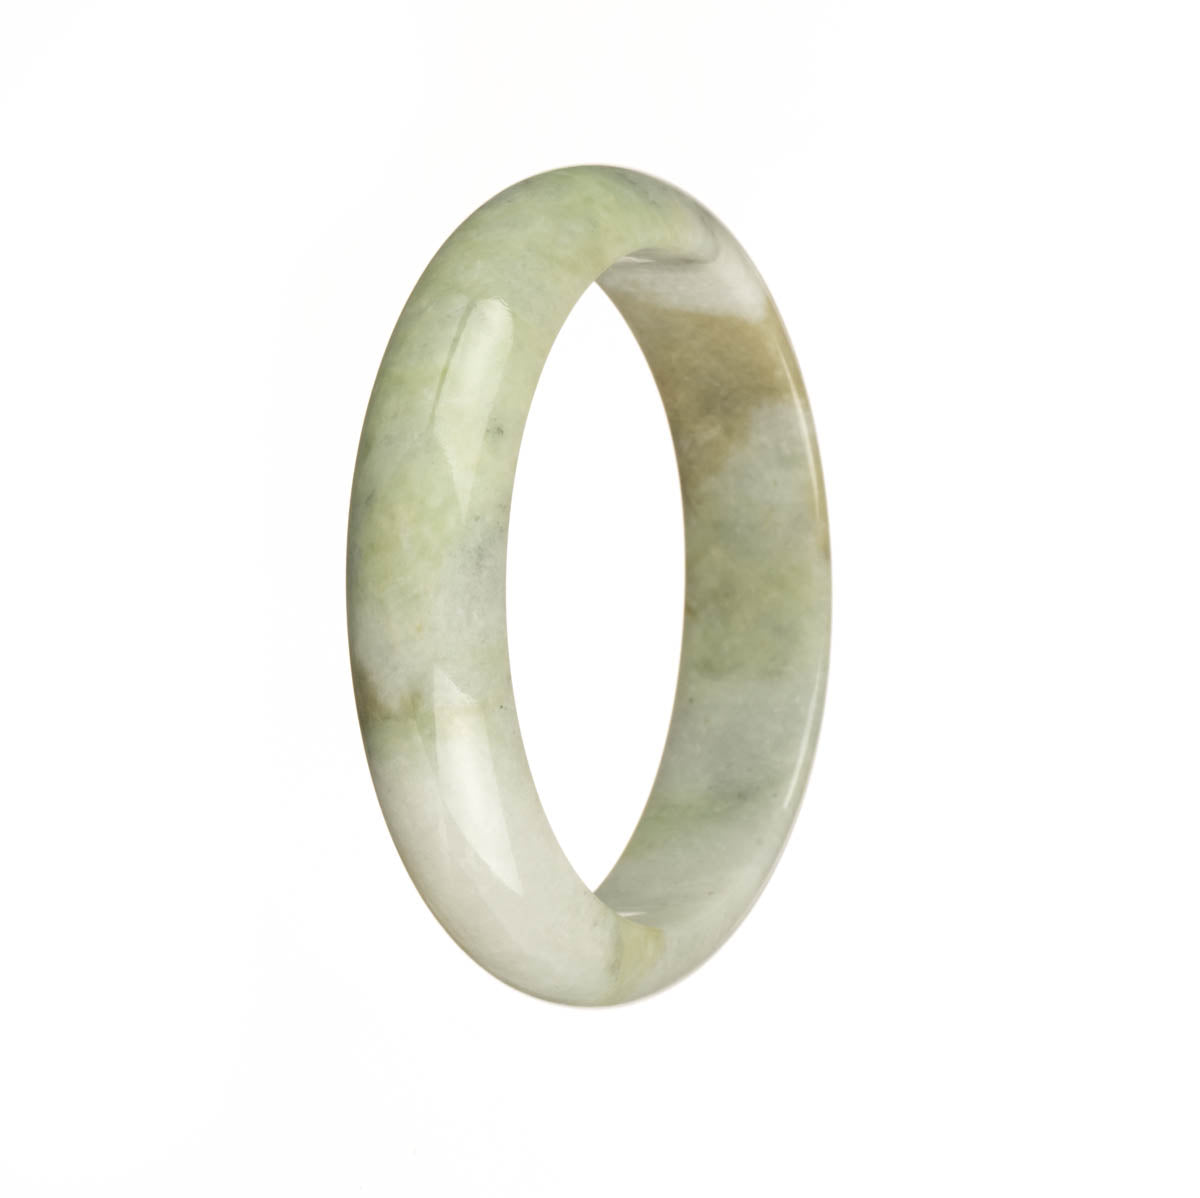 A stunning Burmese jade bangle bracelet with a real grade A pale green color and beautiful olive green pattern, shaped like a 54mm half moon. Perfect addition to your jewelry collection from MAYS.